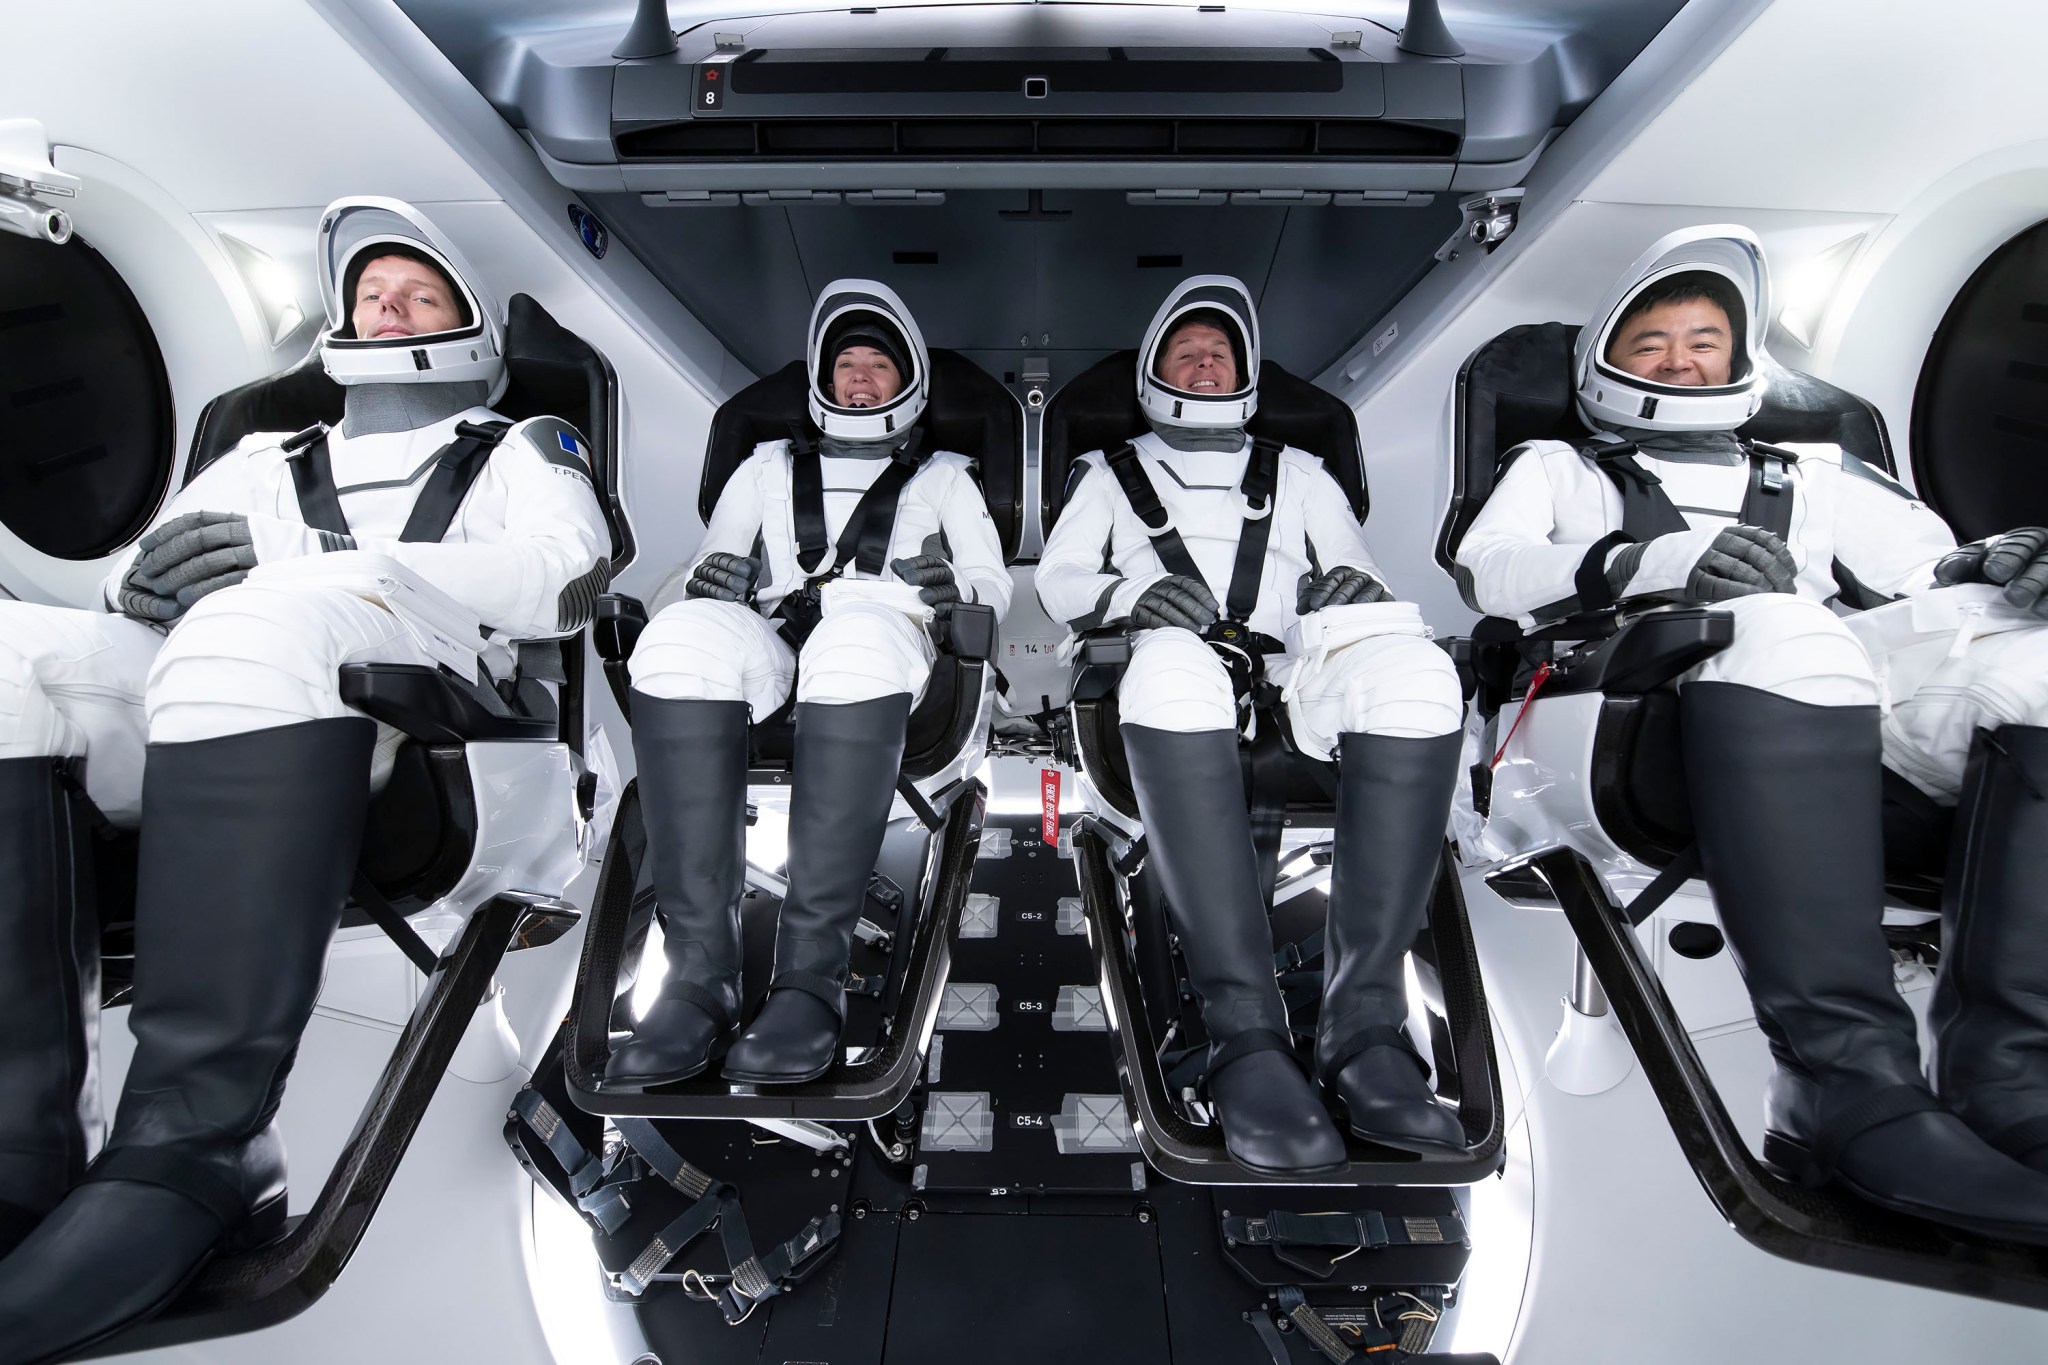 The Crew-2 astronauts seated inside SpaceX's Dragon spacecraft.